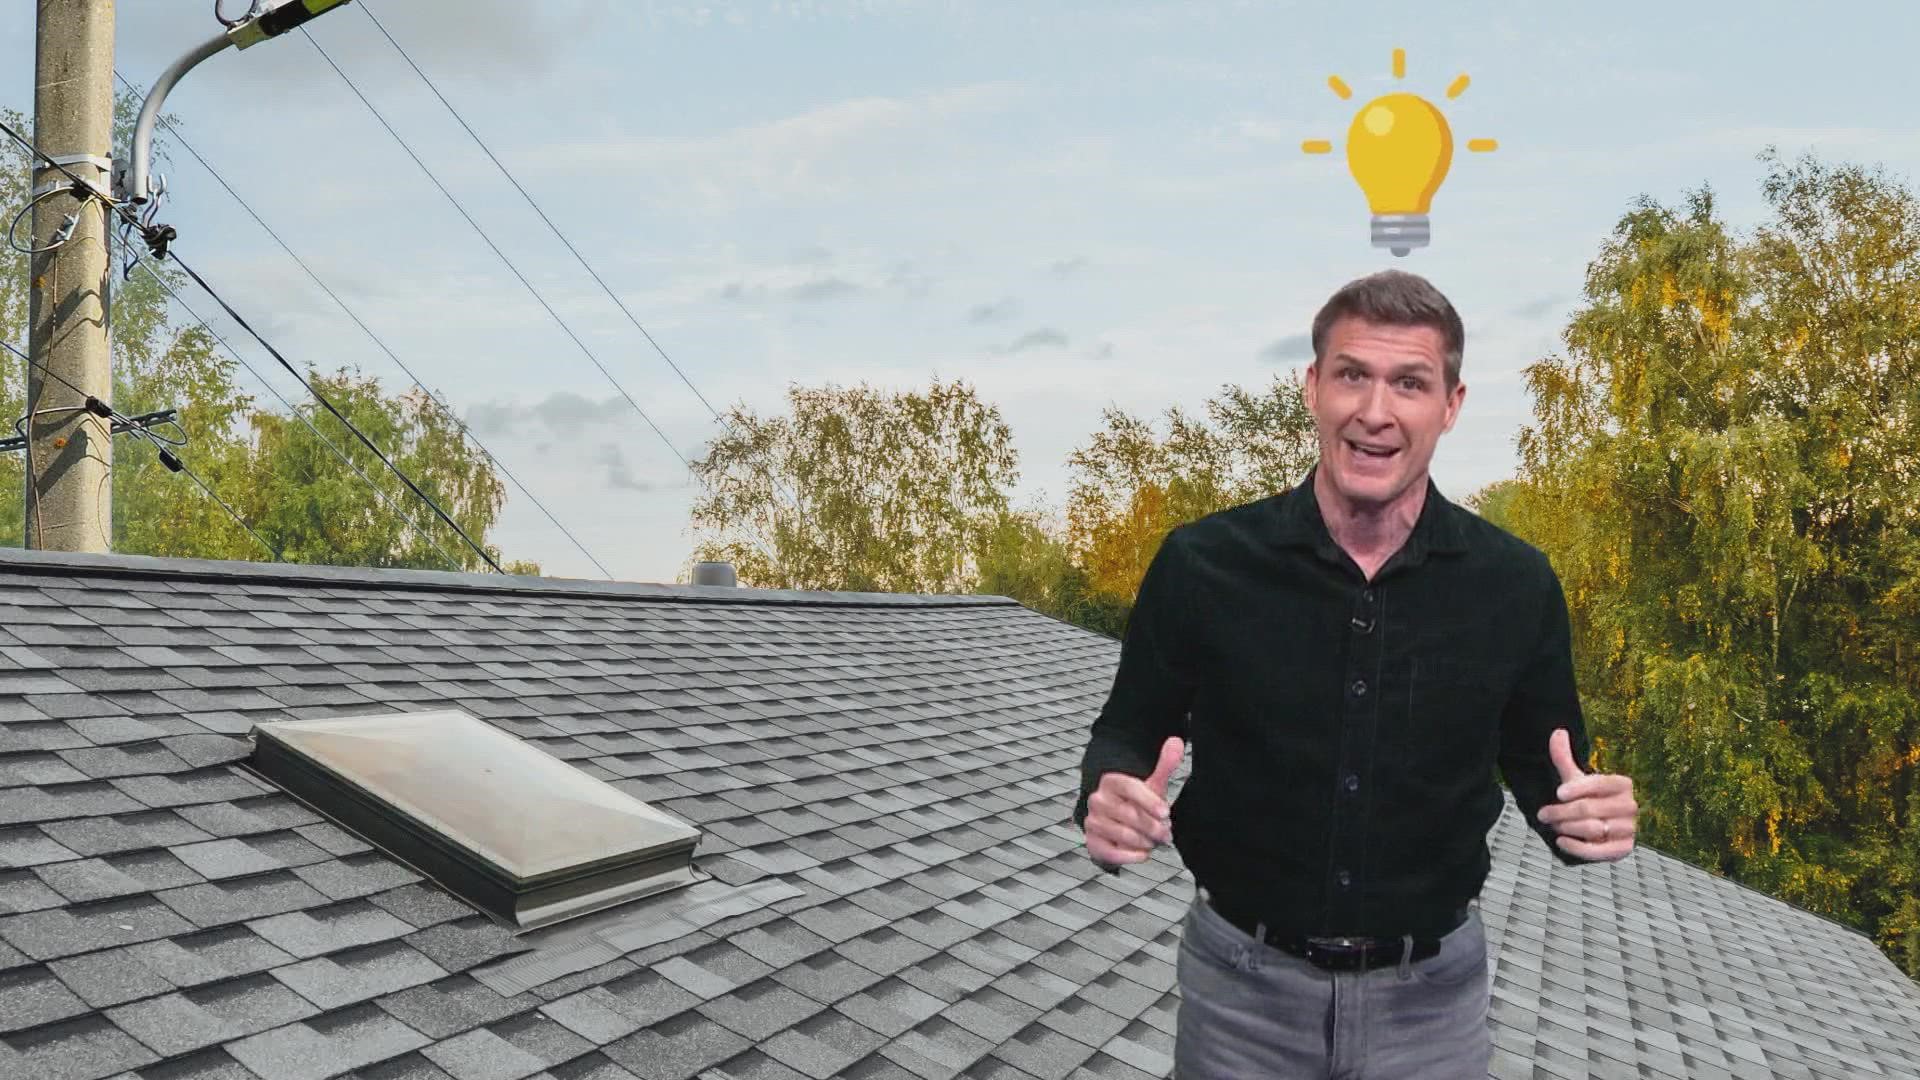 Texas electricity rates are soaring, but is your home a good fit for solar panels?